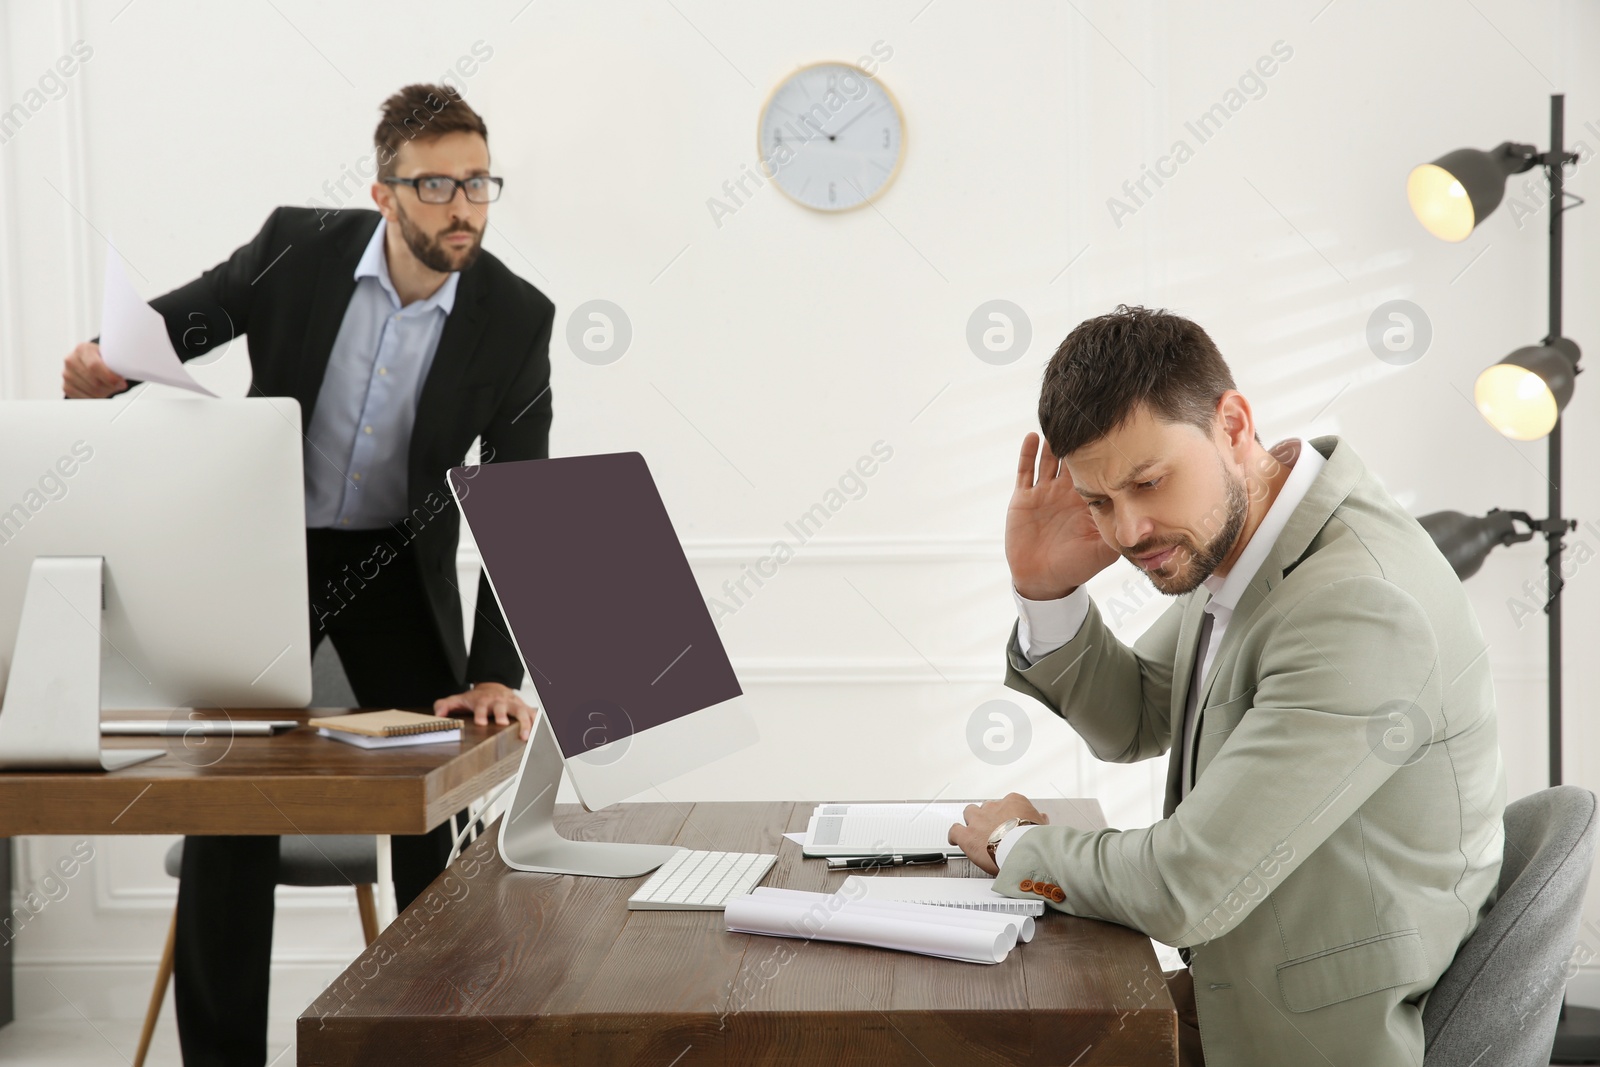 Photo of Boss scolding employee in office. Toxic work environment